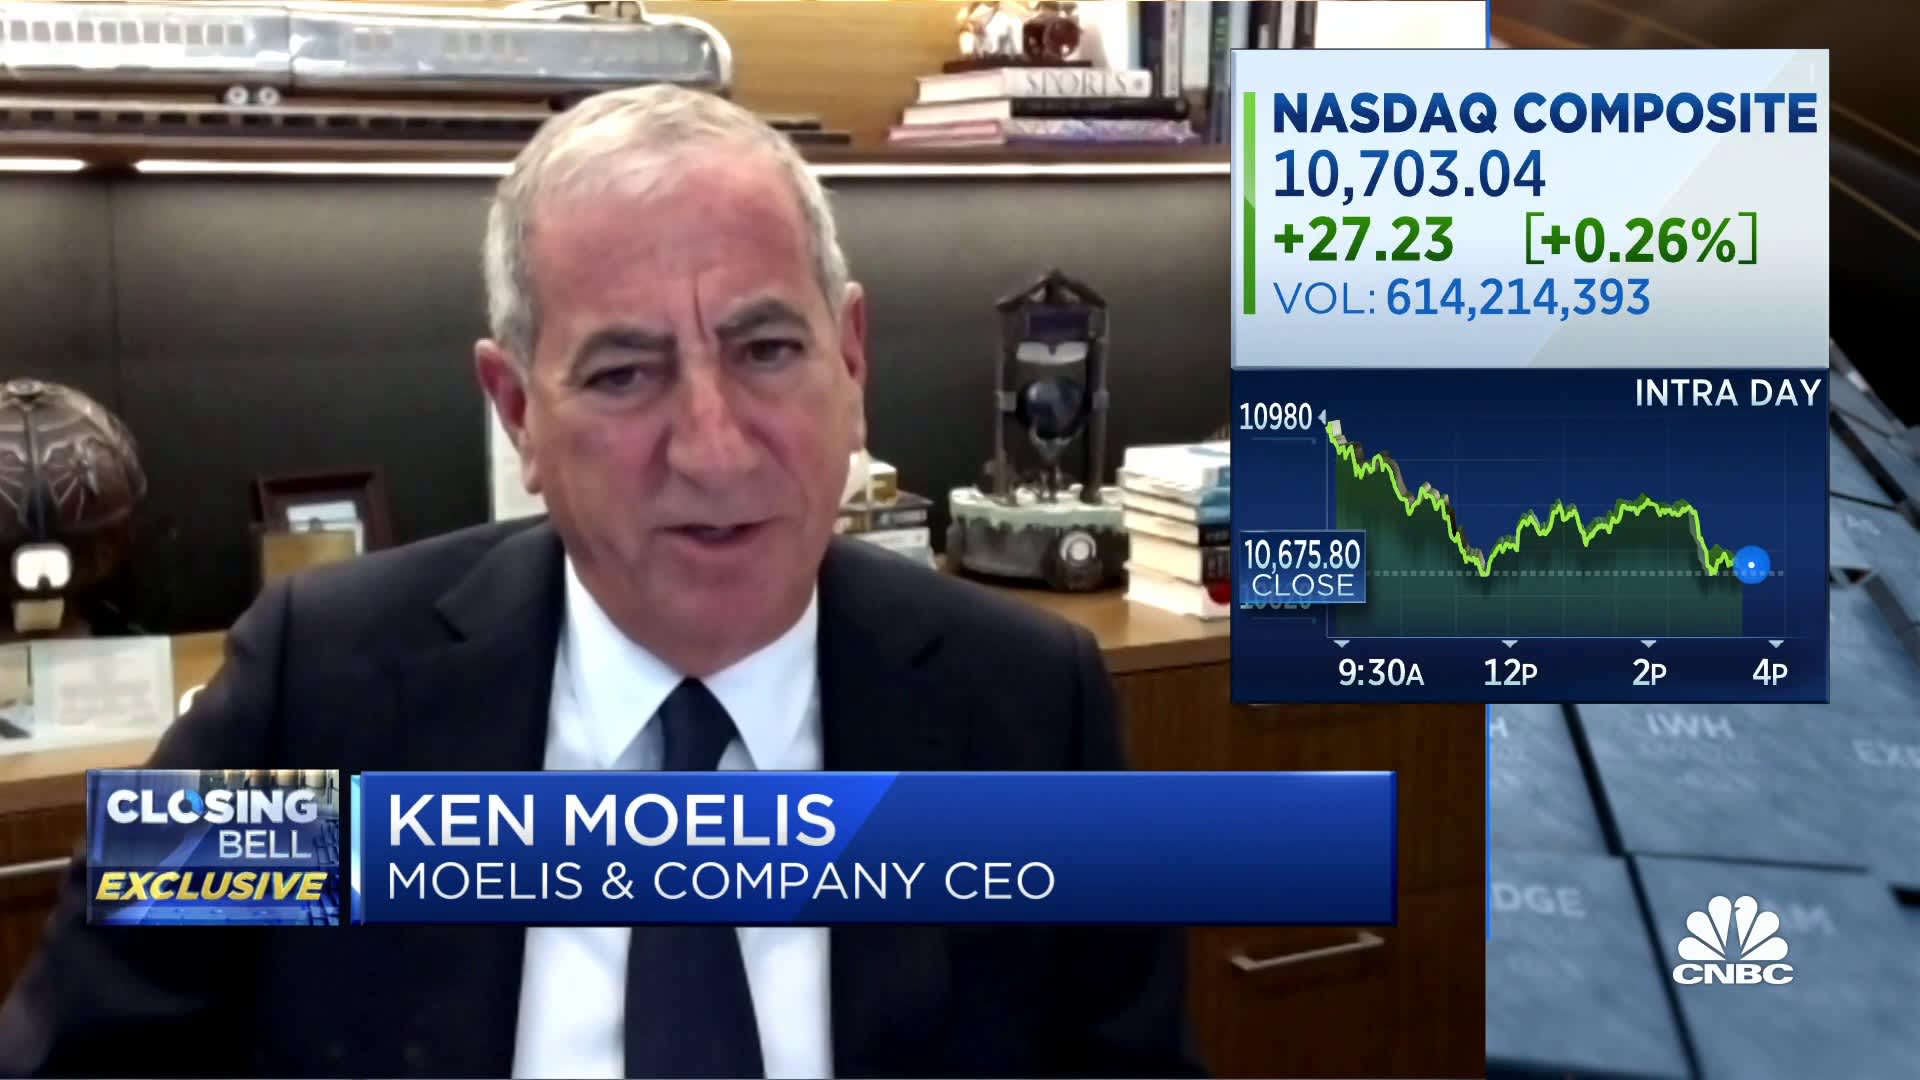 fed-s-jackson-hole-comments-led-to-a-rapid-increase-in-volatility-says-moelis-and-amp-company-ceo